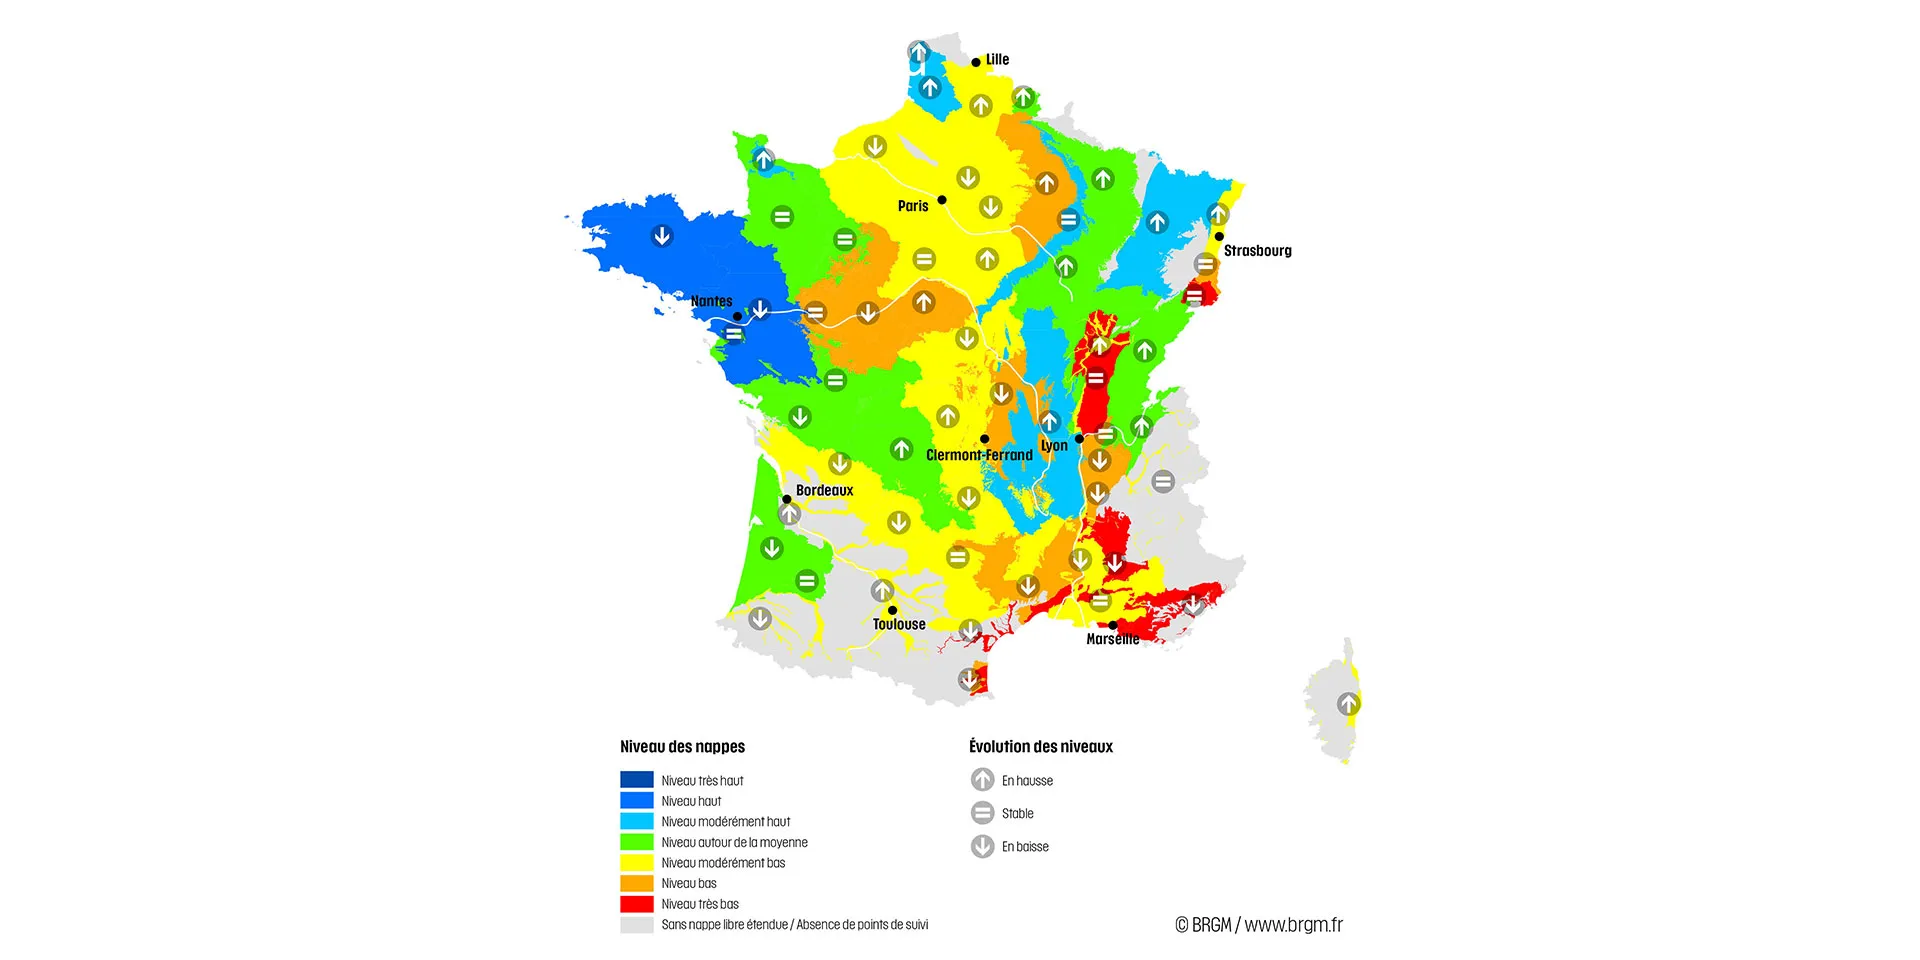 Map of France showing the state of the aquifers on 1 May 2023.